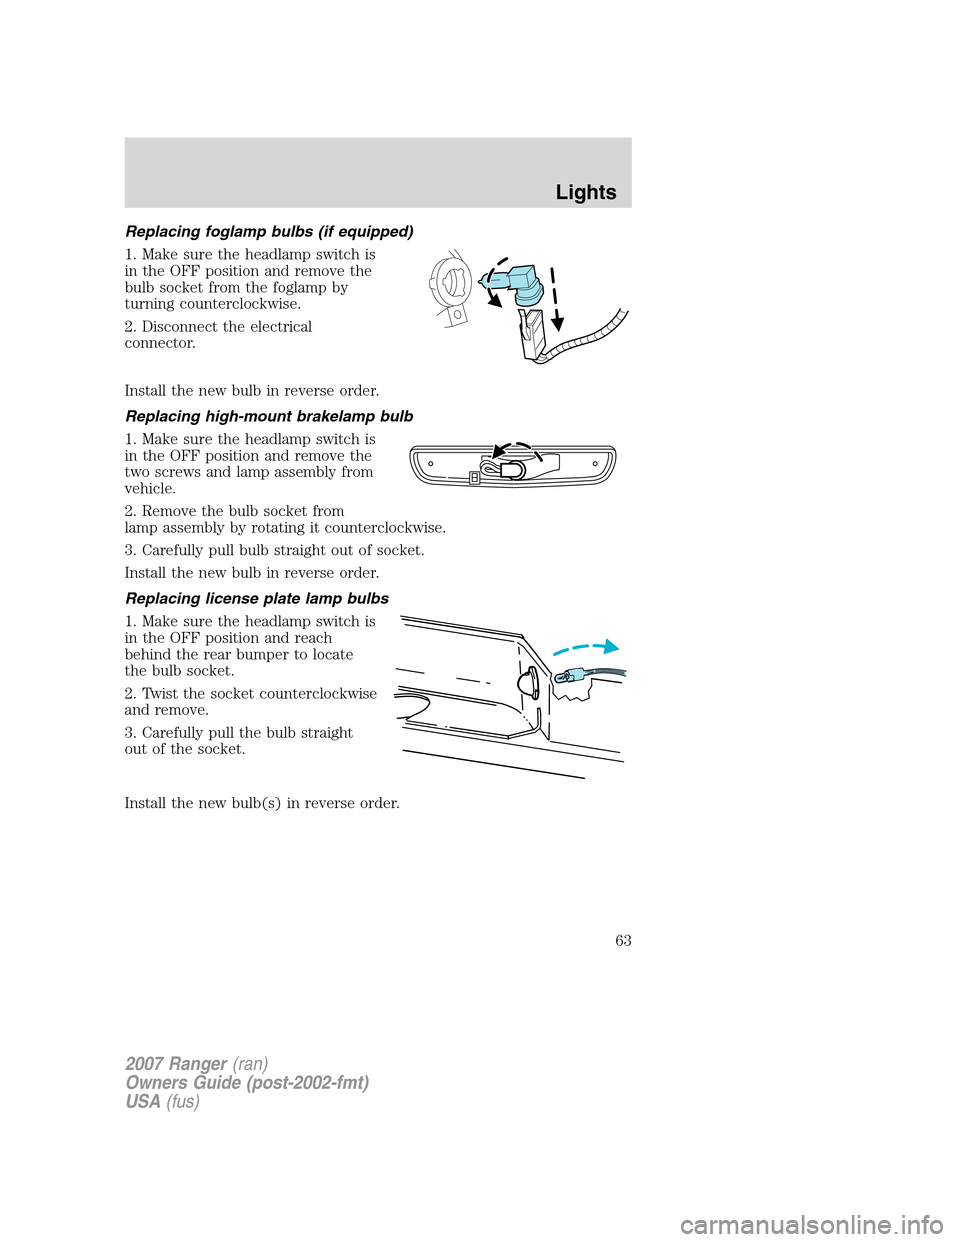 FORD RANGER 2007 2.G Owners Manual Replacing foglamp bulbs (if equipped)
1. Make sure the headlamp switch is
in the OFF position and remove the
bulb socket from the foglamp by
turning counterclockwise.
2. Disconnect the electrical
conn